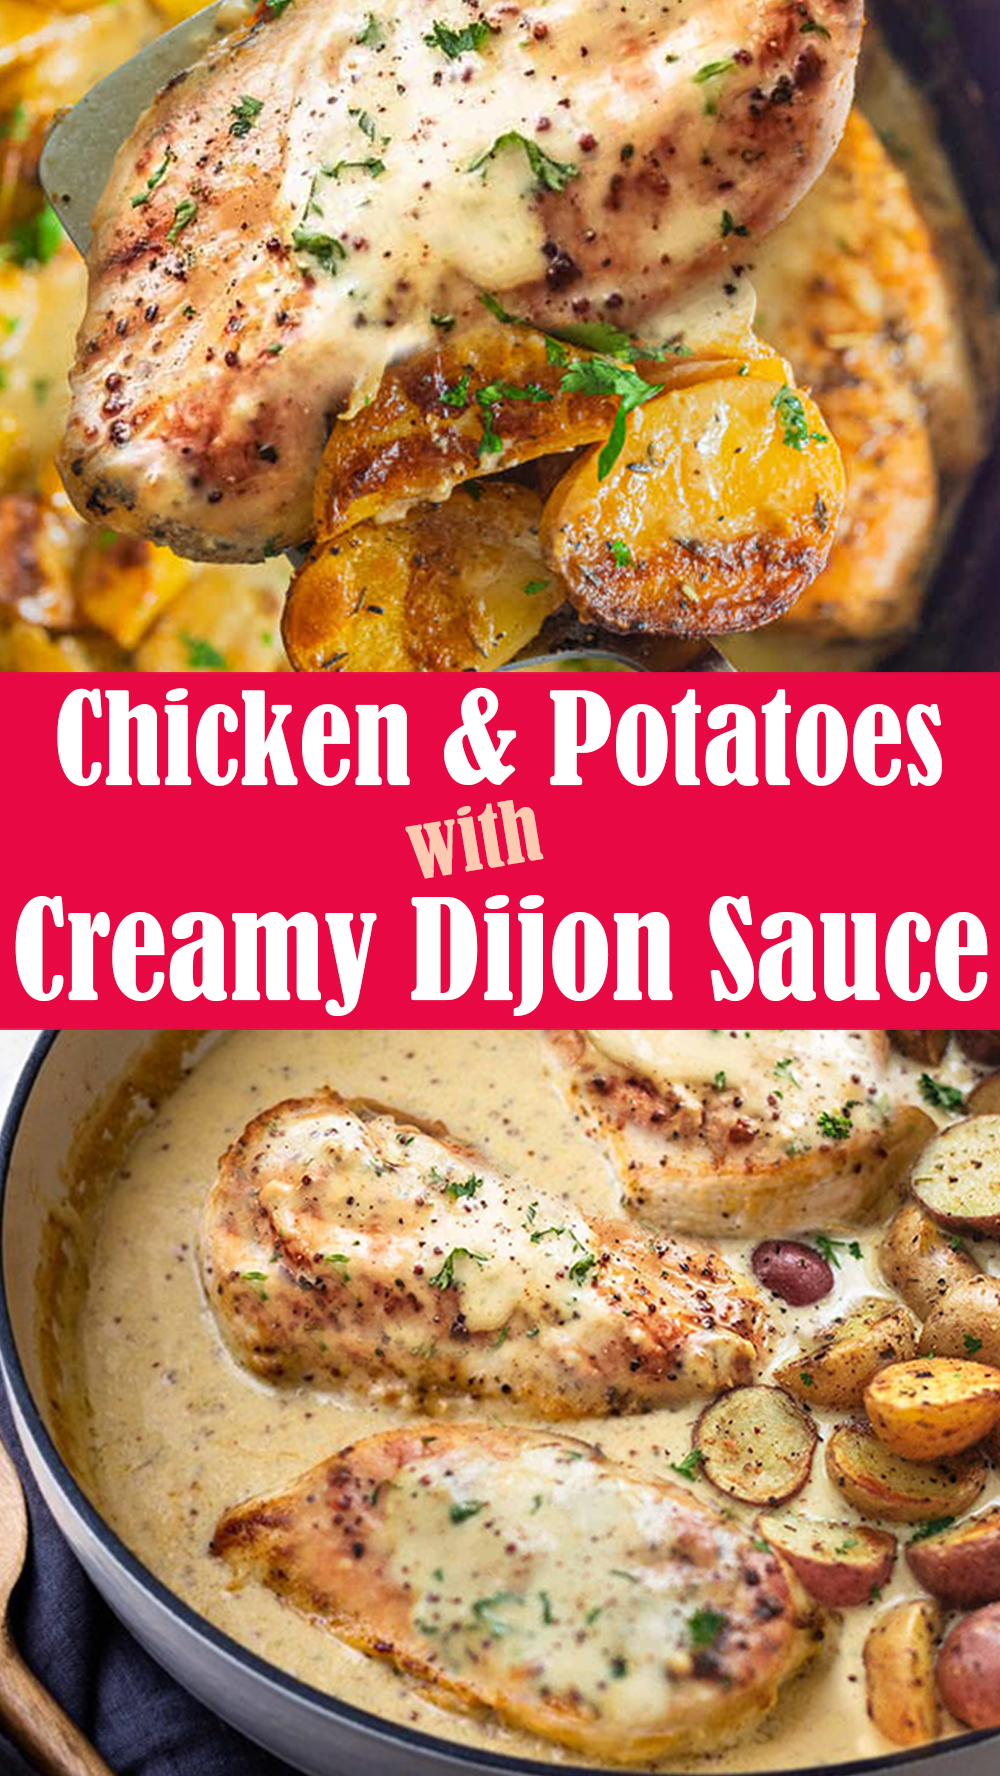 Chicken and Potatoes with Creamy Dijon Sauce